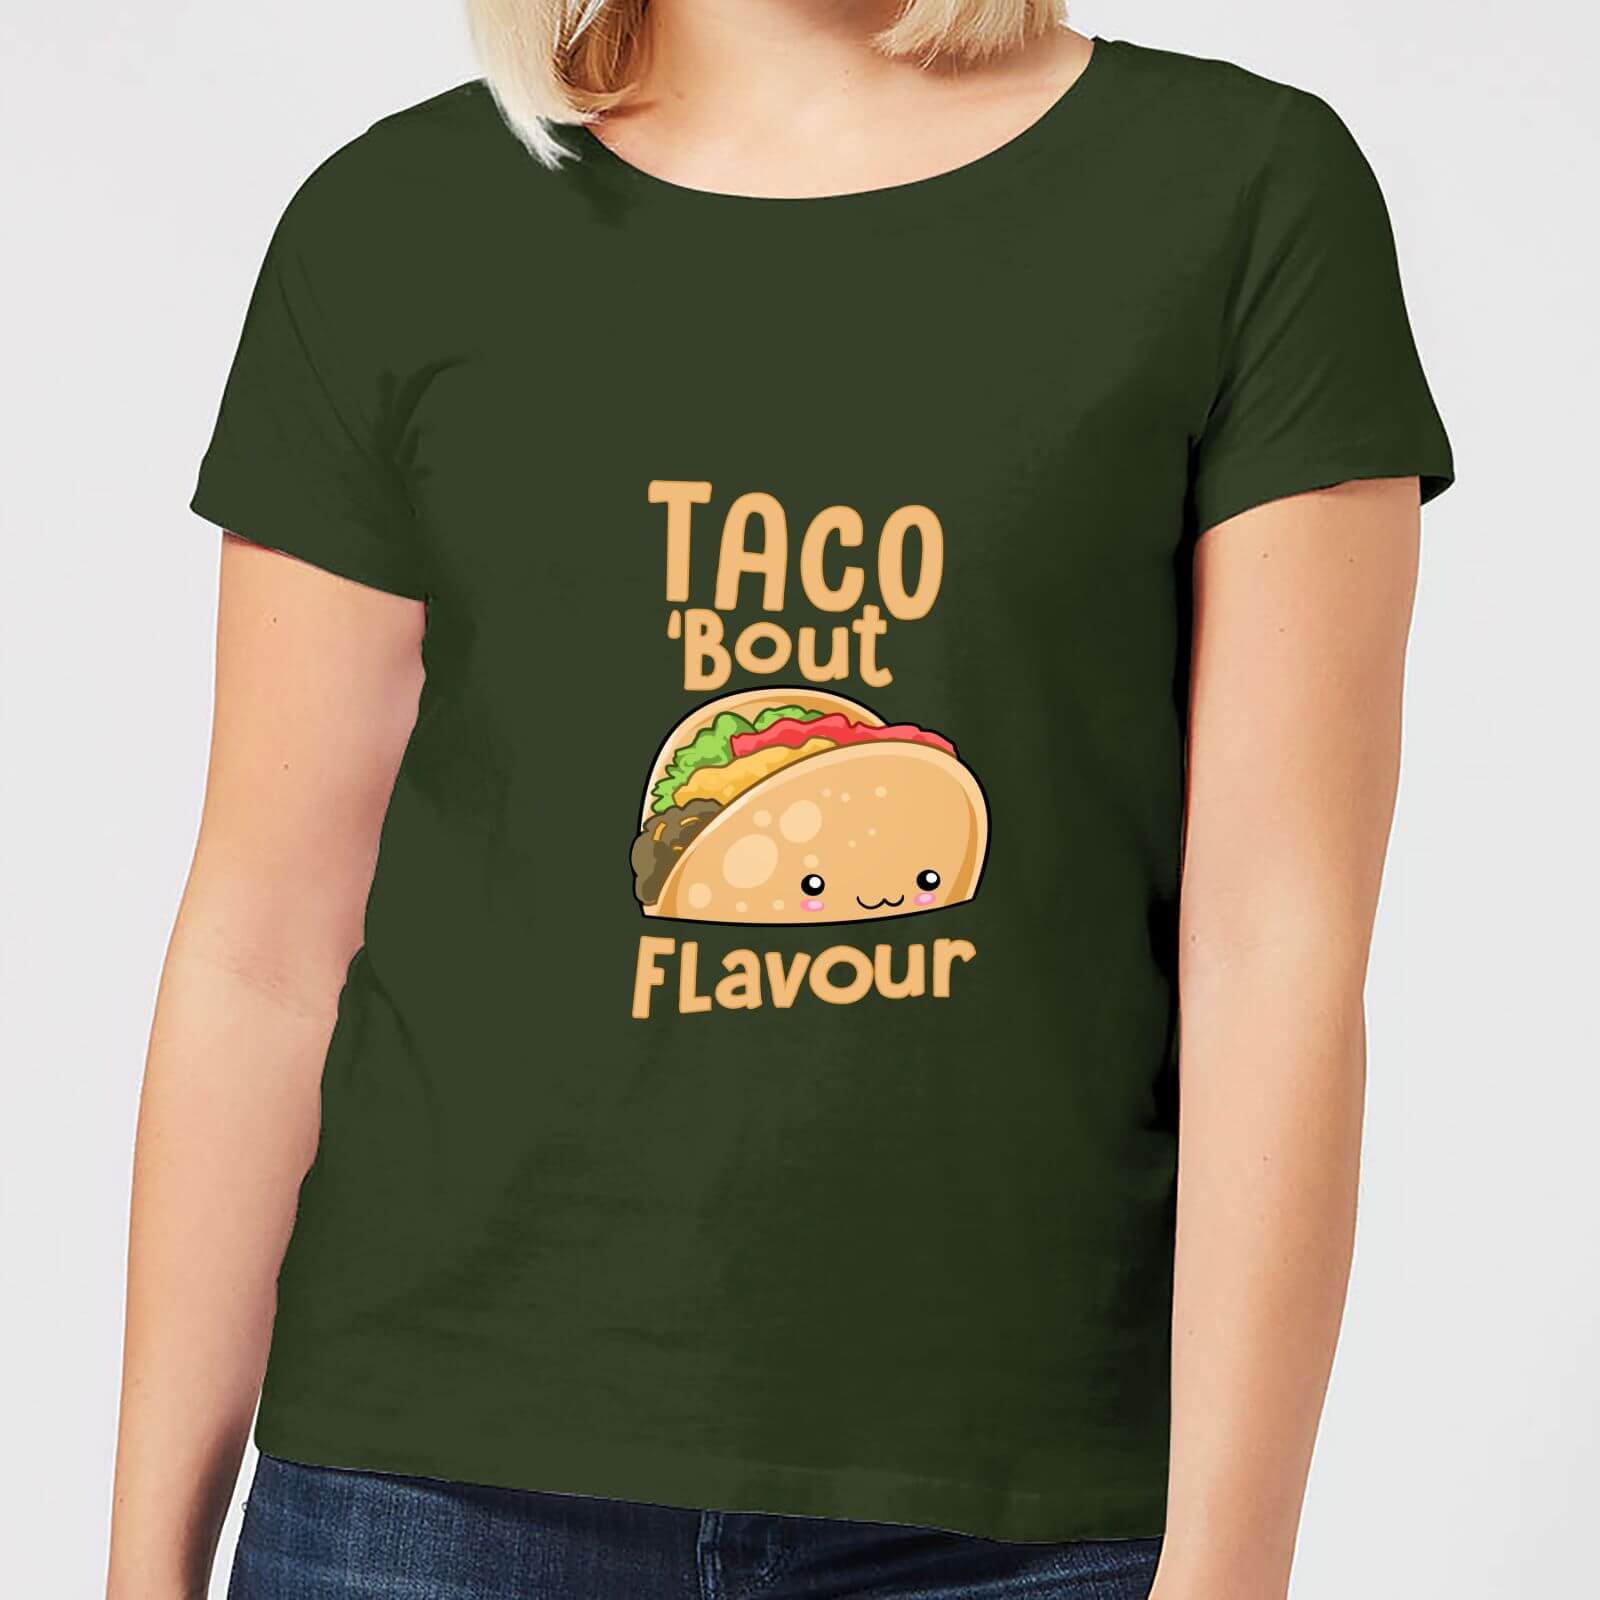 Taco 'Bout Flavour Women's T-Shirt - Forest Green - S - Forest Green